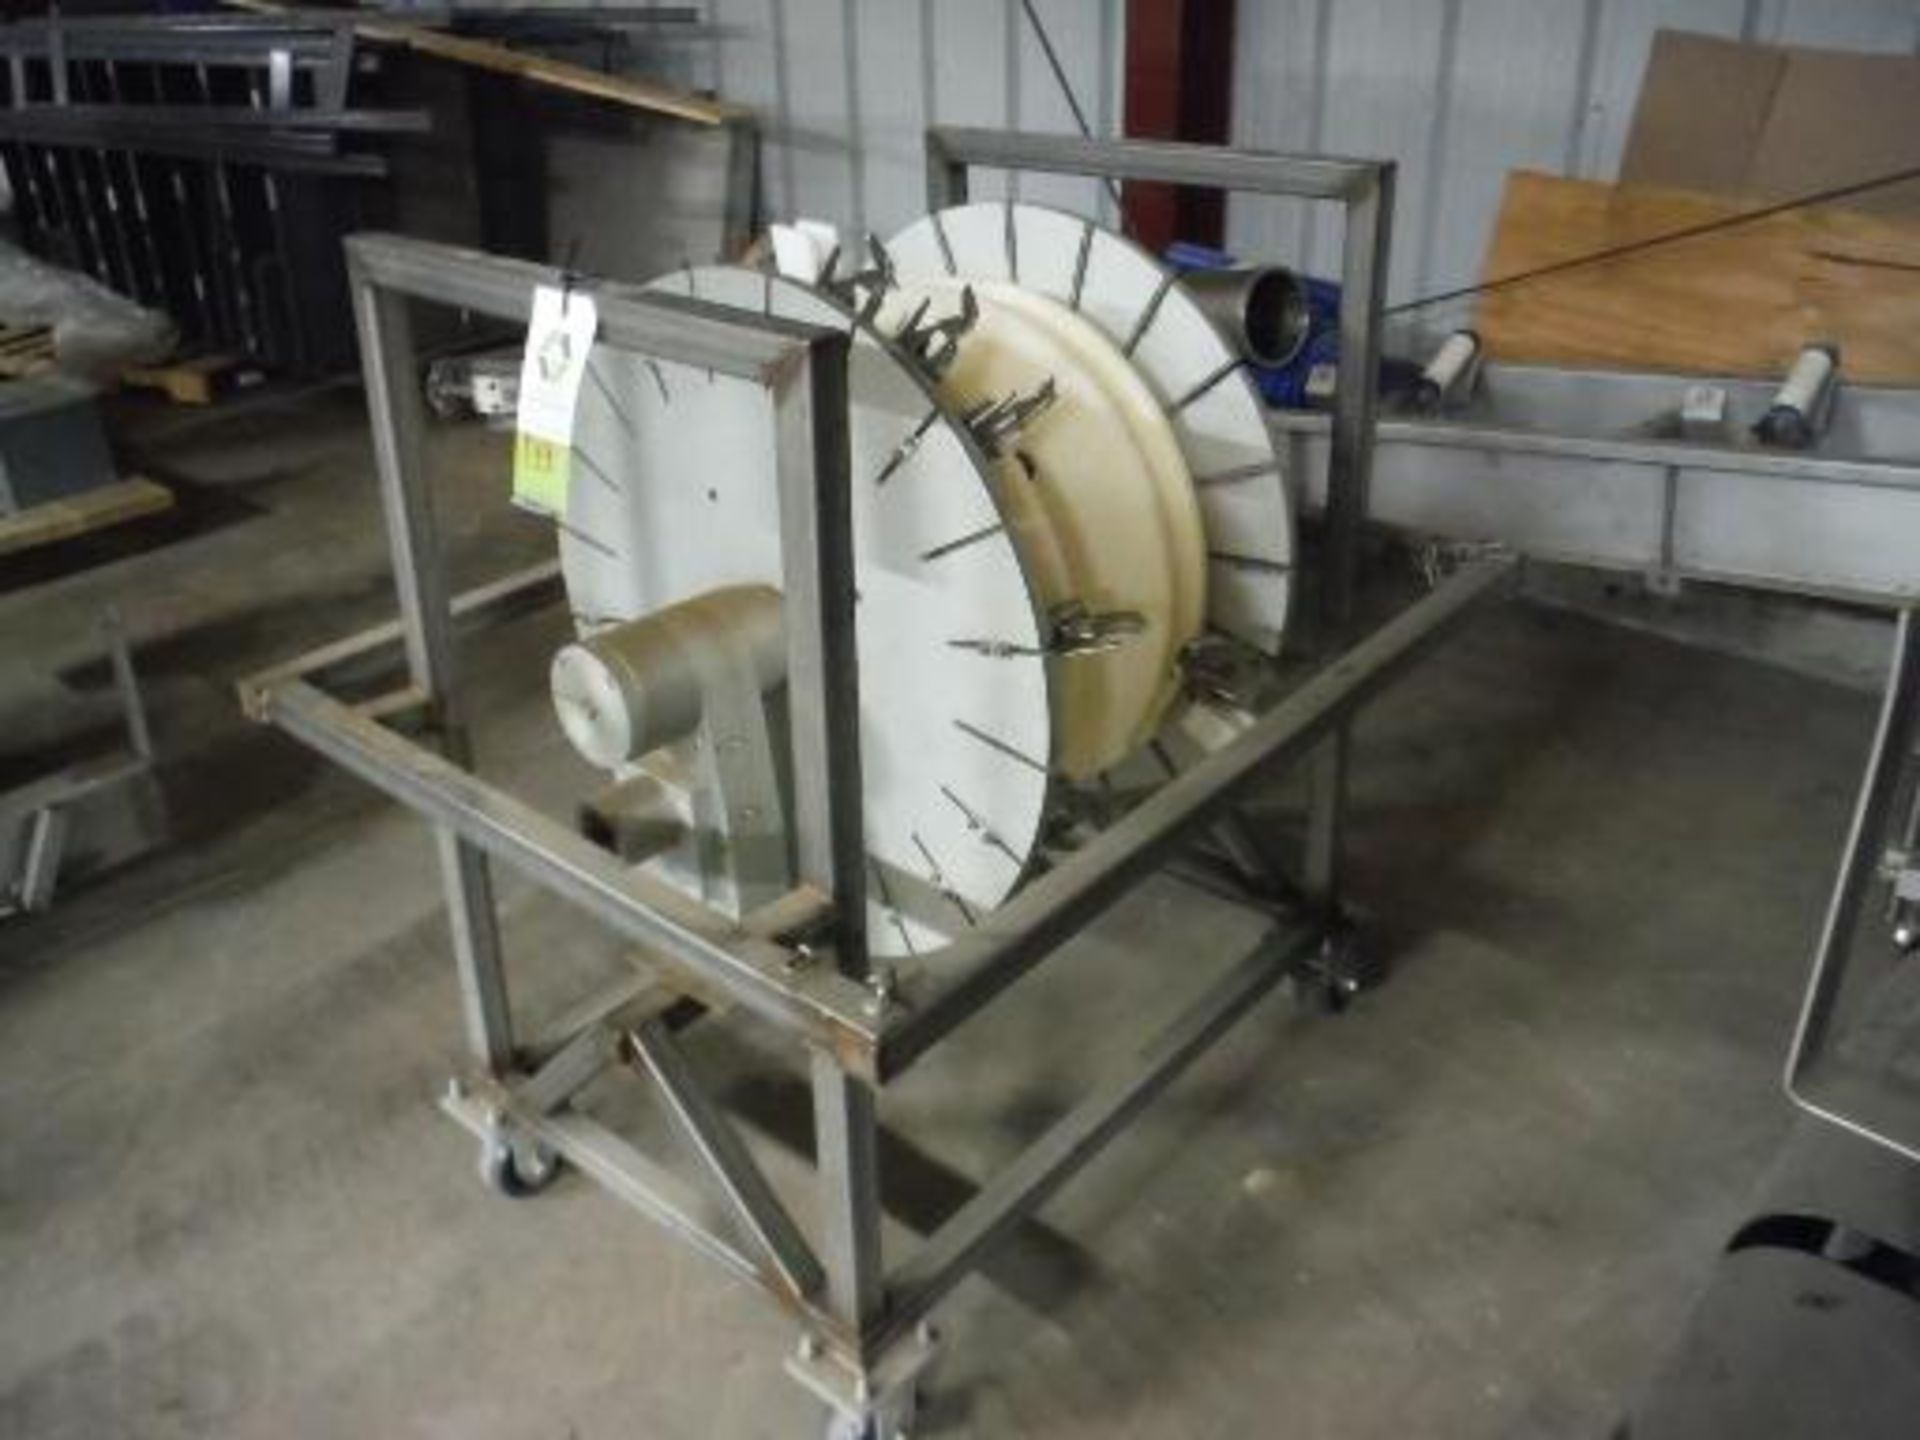 20 link double reel on cart, SS frame, casters This item is located in Kansas **__ A Rigging Fee